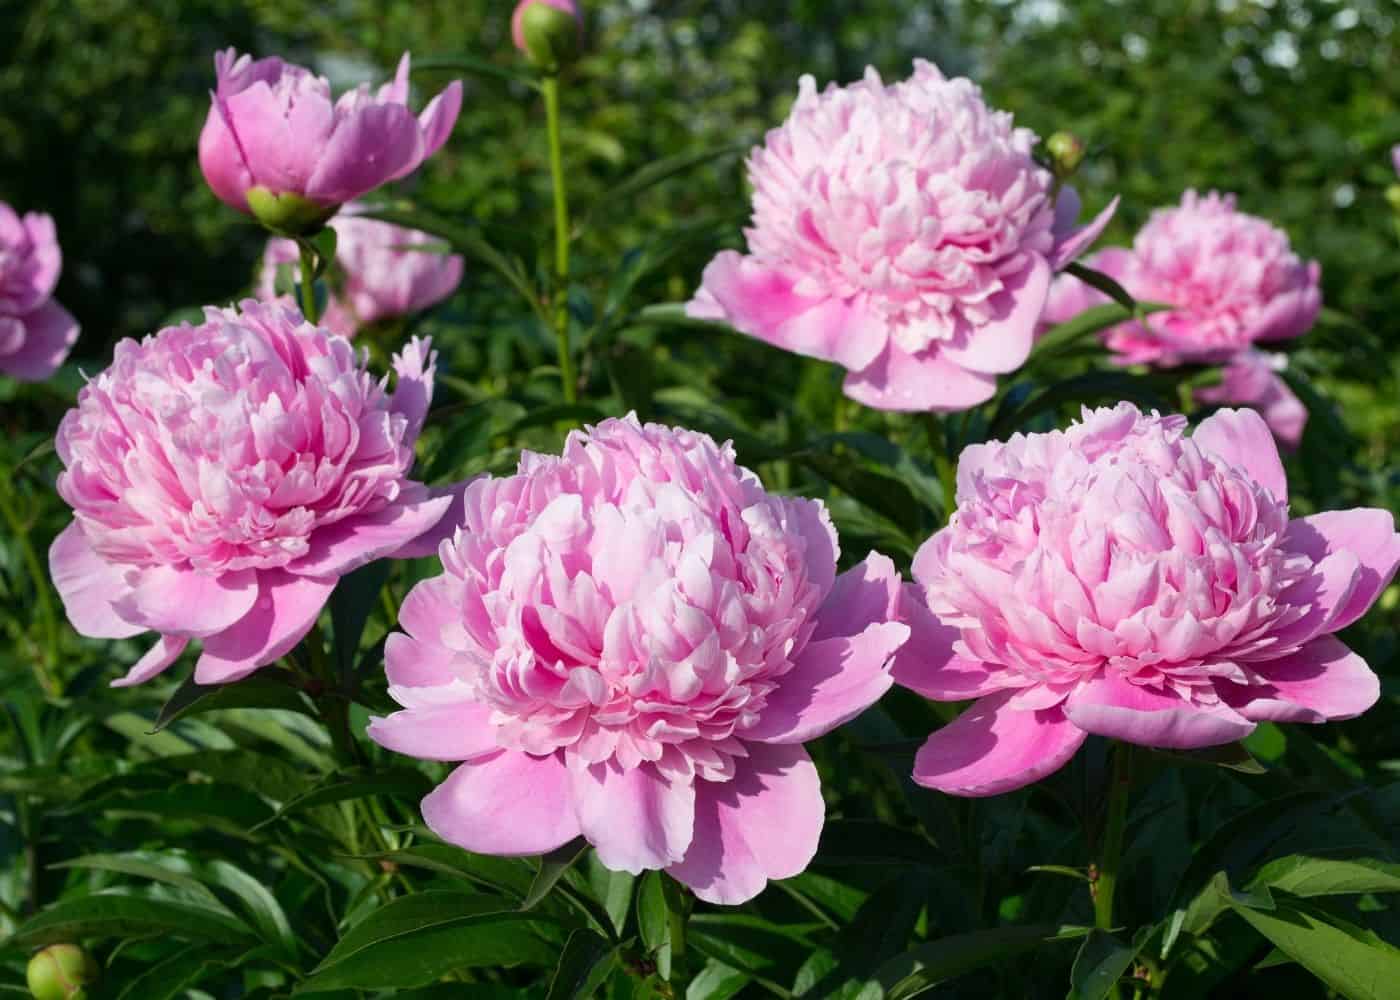 How To Winterize Peony Bushes A Peony Garden Guide To Planting, Growing, & Caring For Peonies | Home for  the Harvest